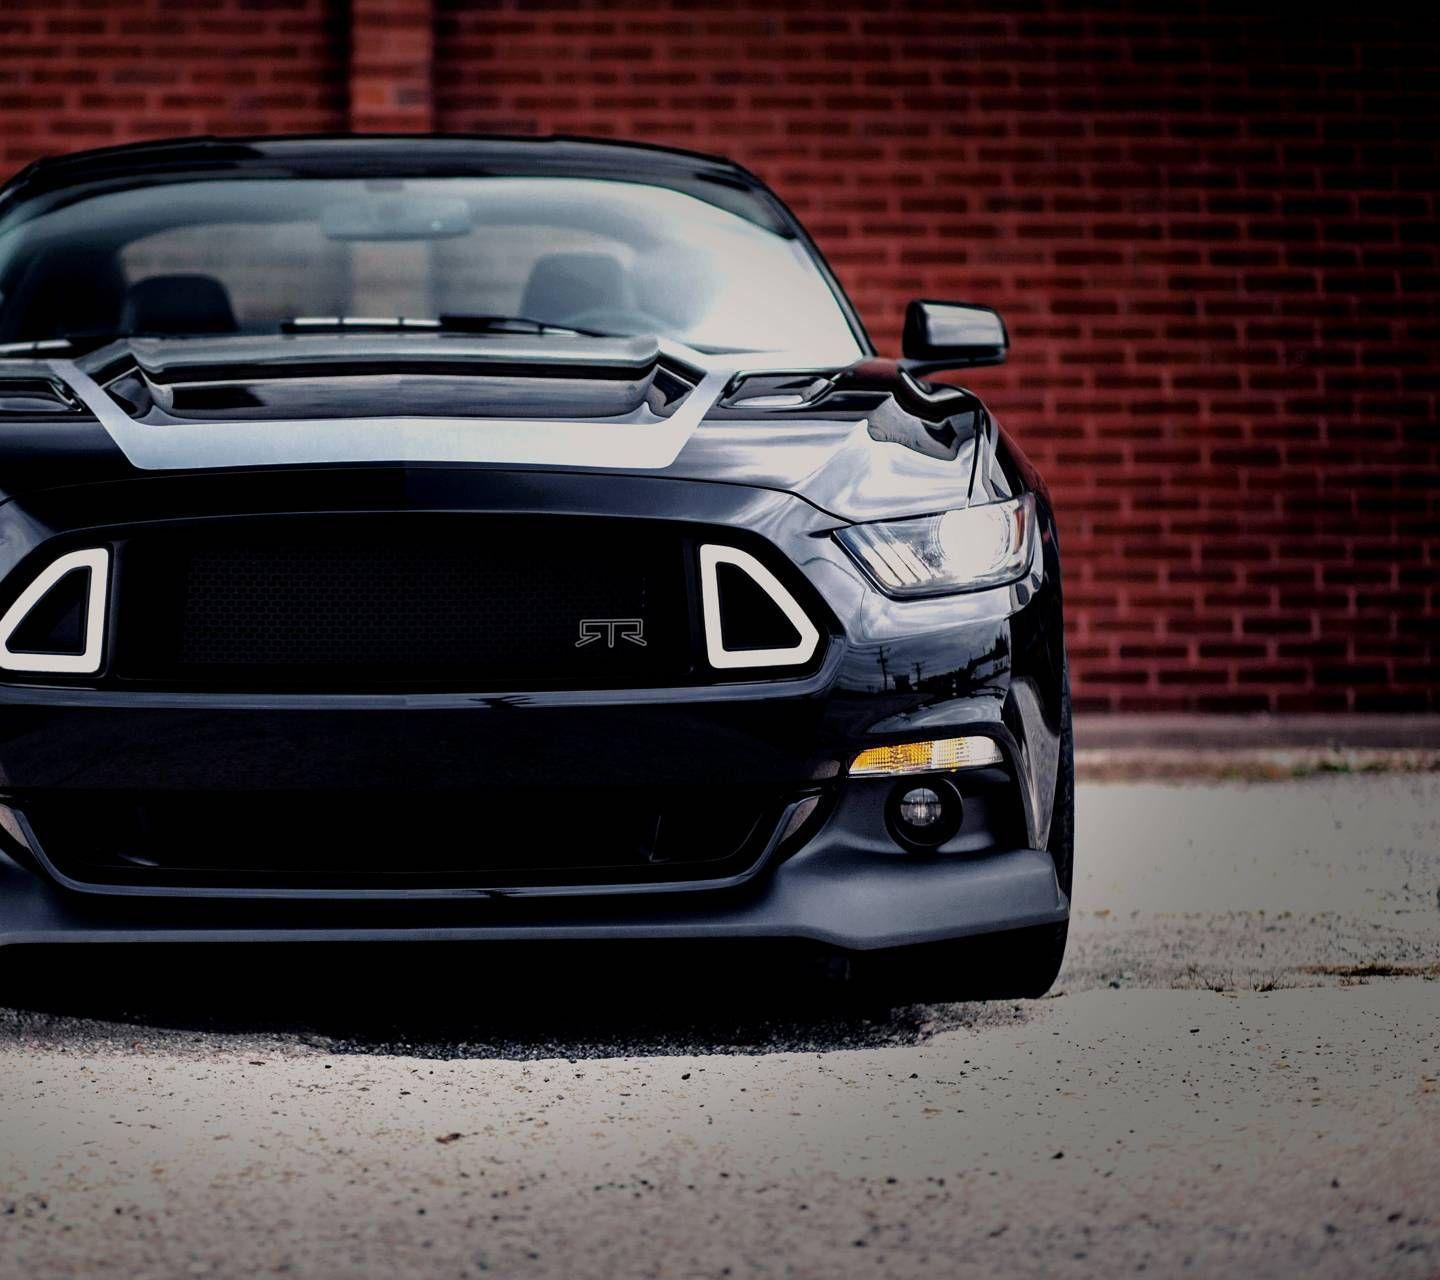 mustang rtr. Cool car picture, Mustang, Hot cars